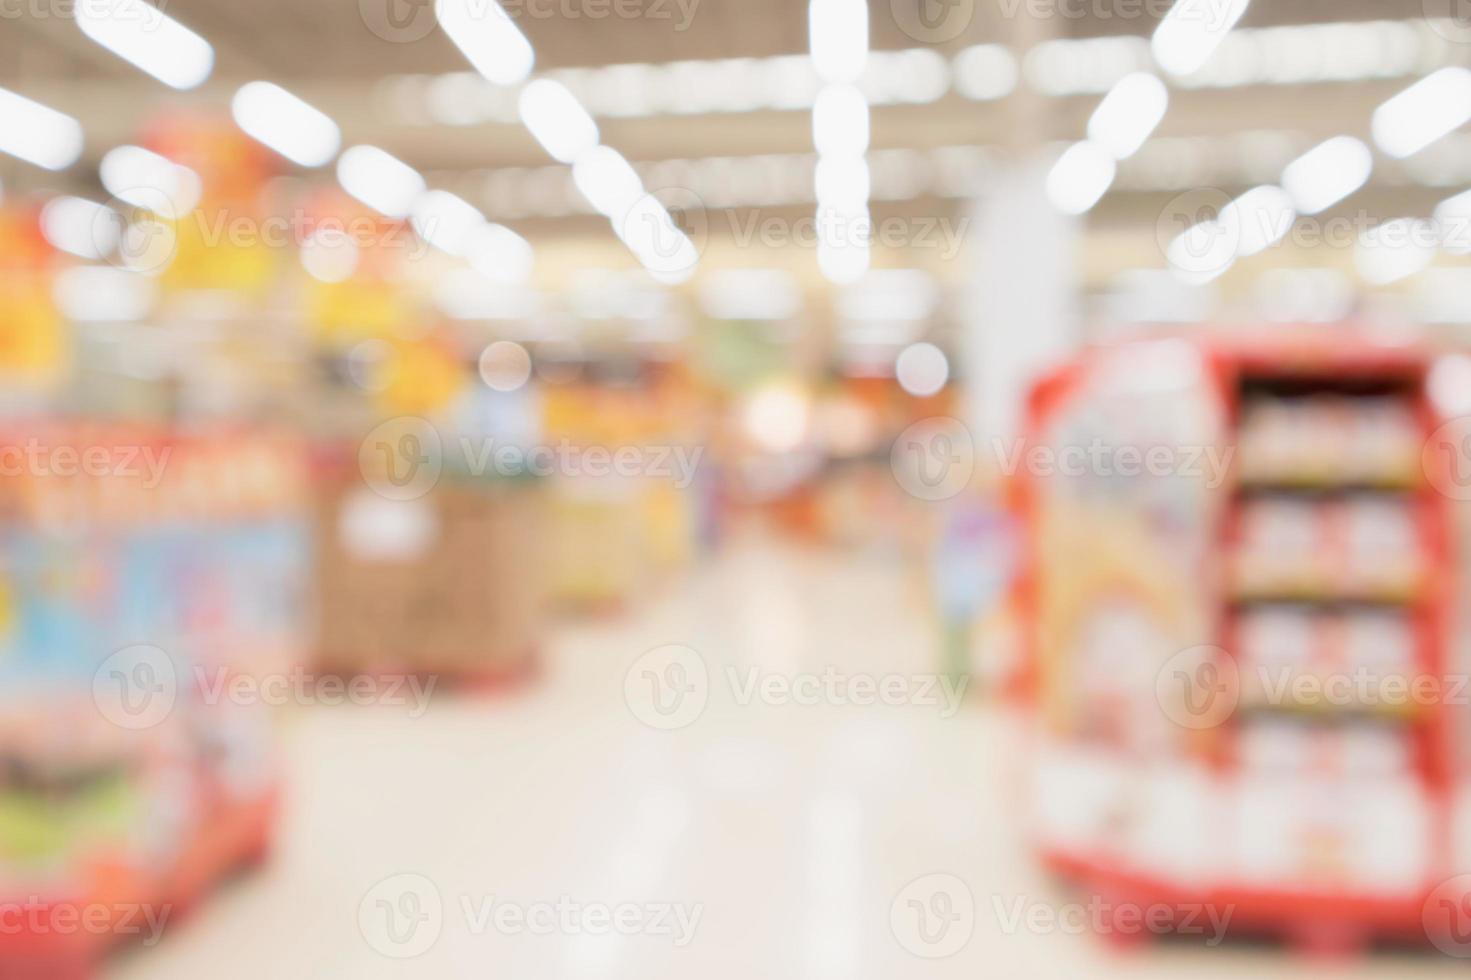 Abstract blur supermarket discount store product shelves interior defocused background photo